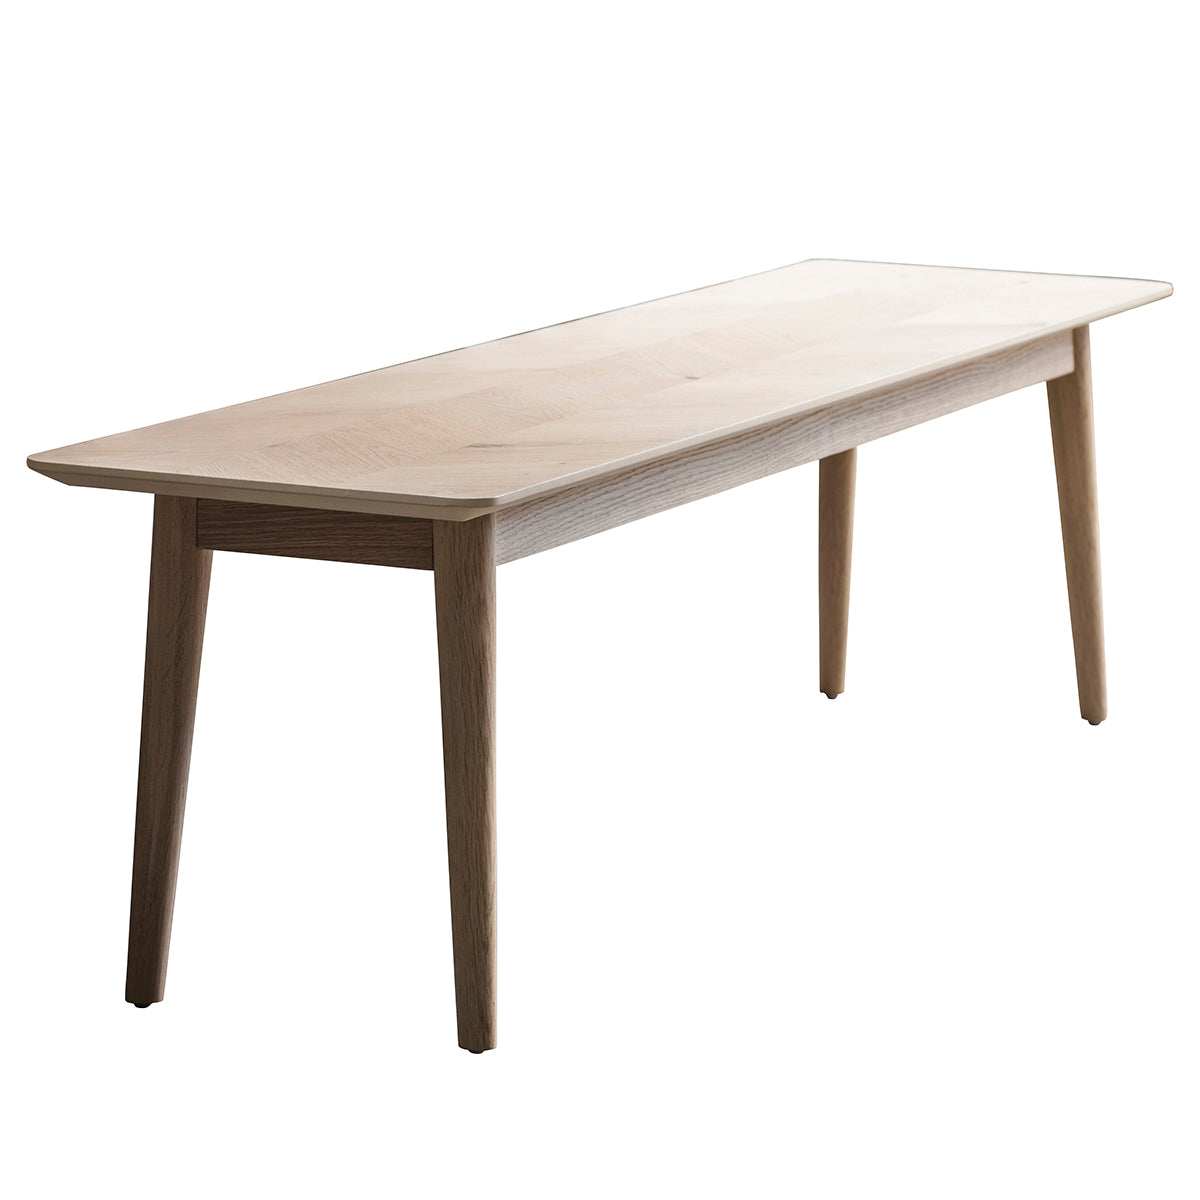 A Tristford Dining Bench 1650x400x450mm with a wooden top and legs perfect for interior decor or home furniture.